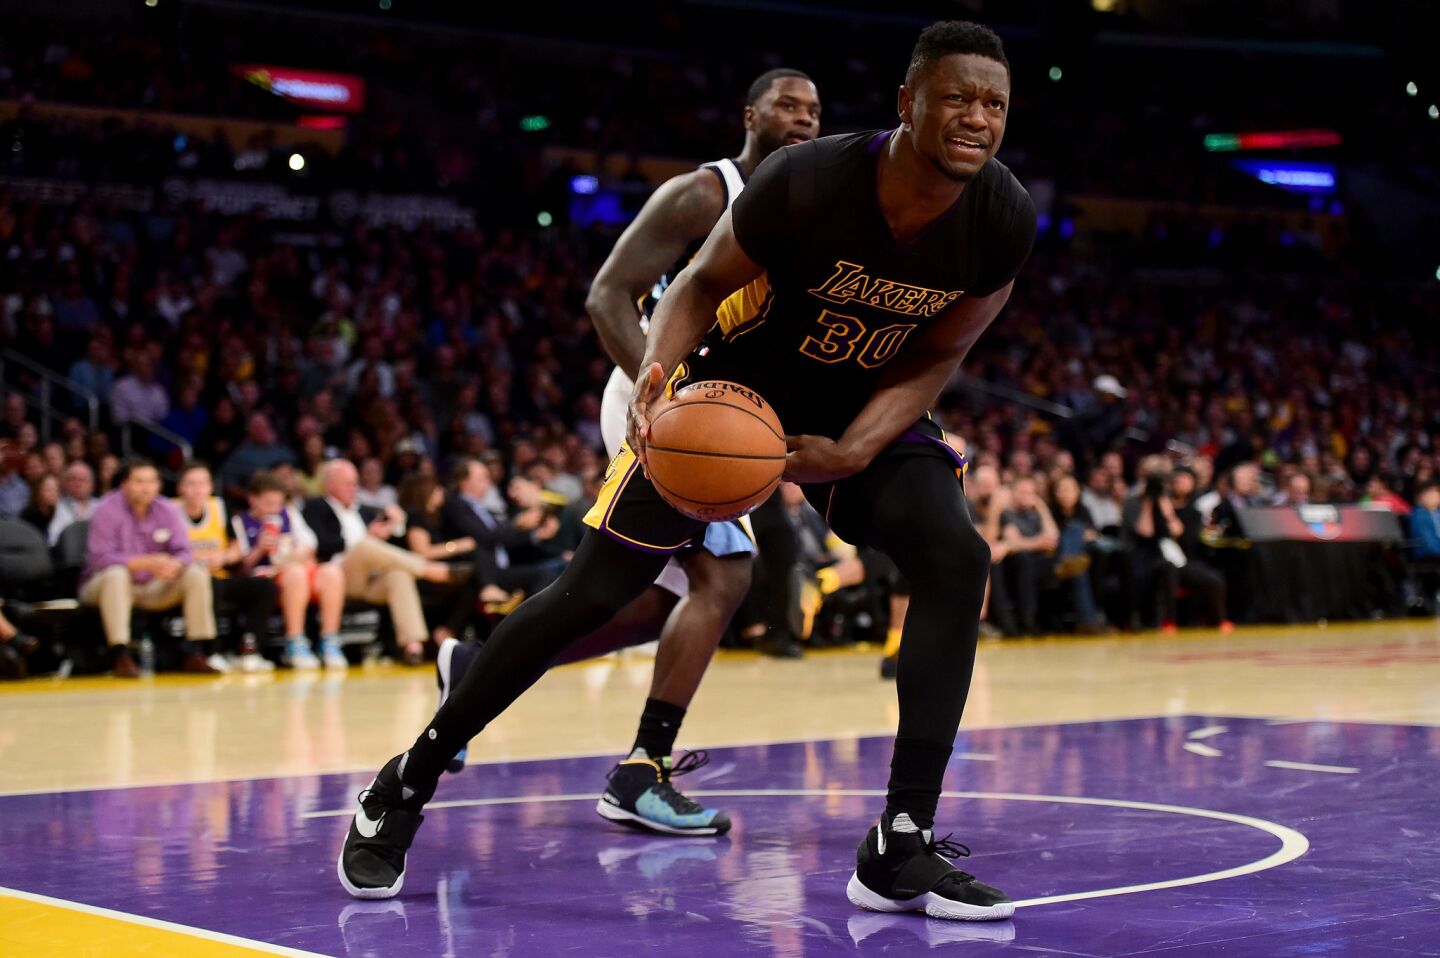 Lakers forward Julius Randle reacts as he is fouled during a game against the Grizzlies on Feb. 26 at Staples Center.